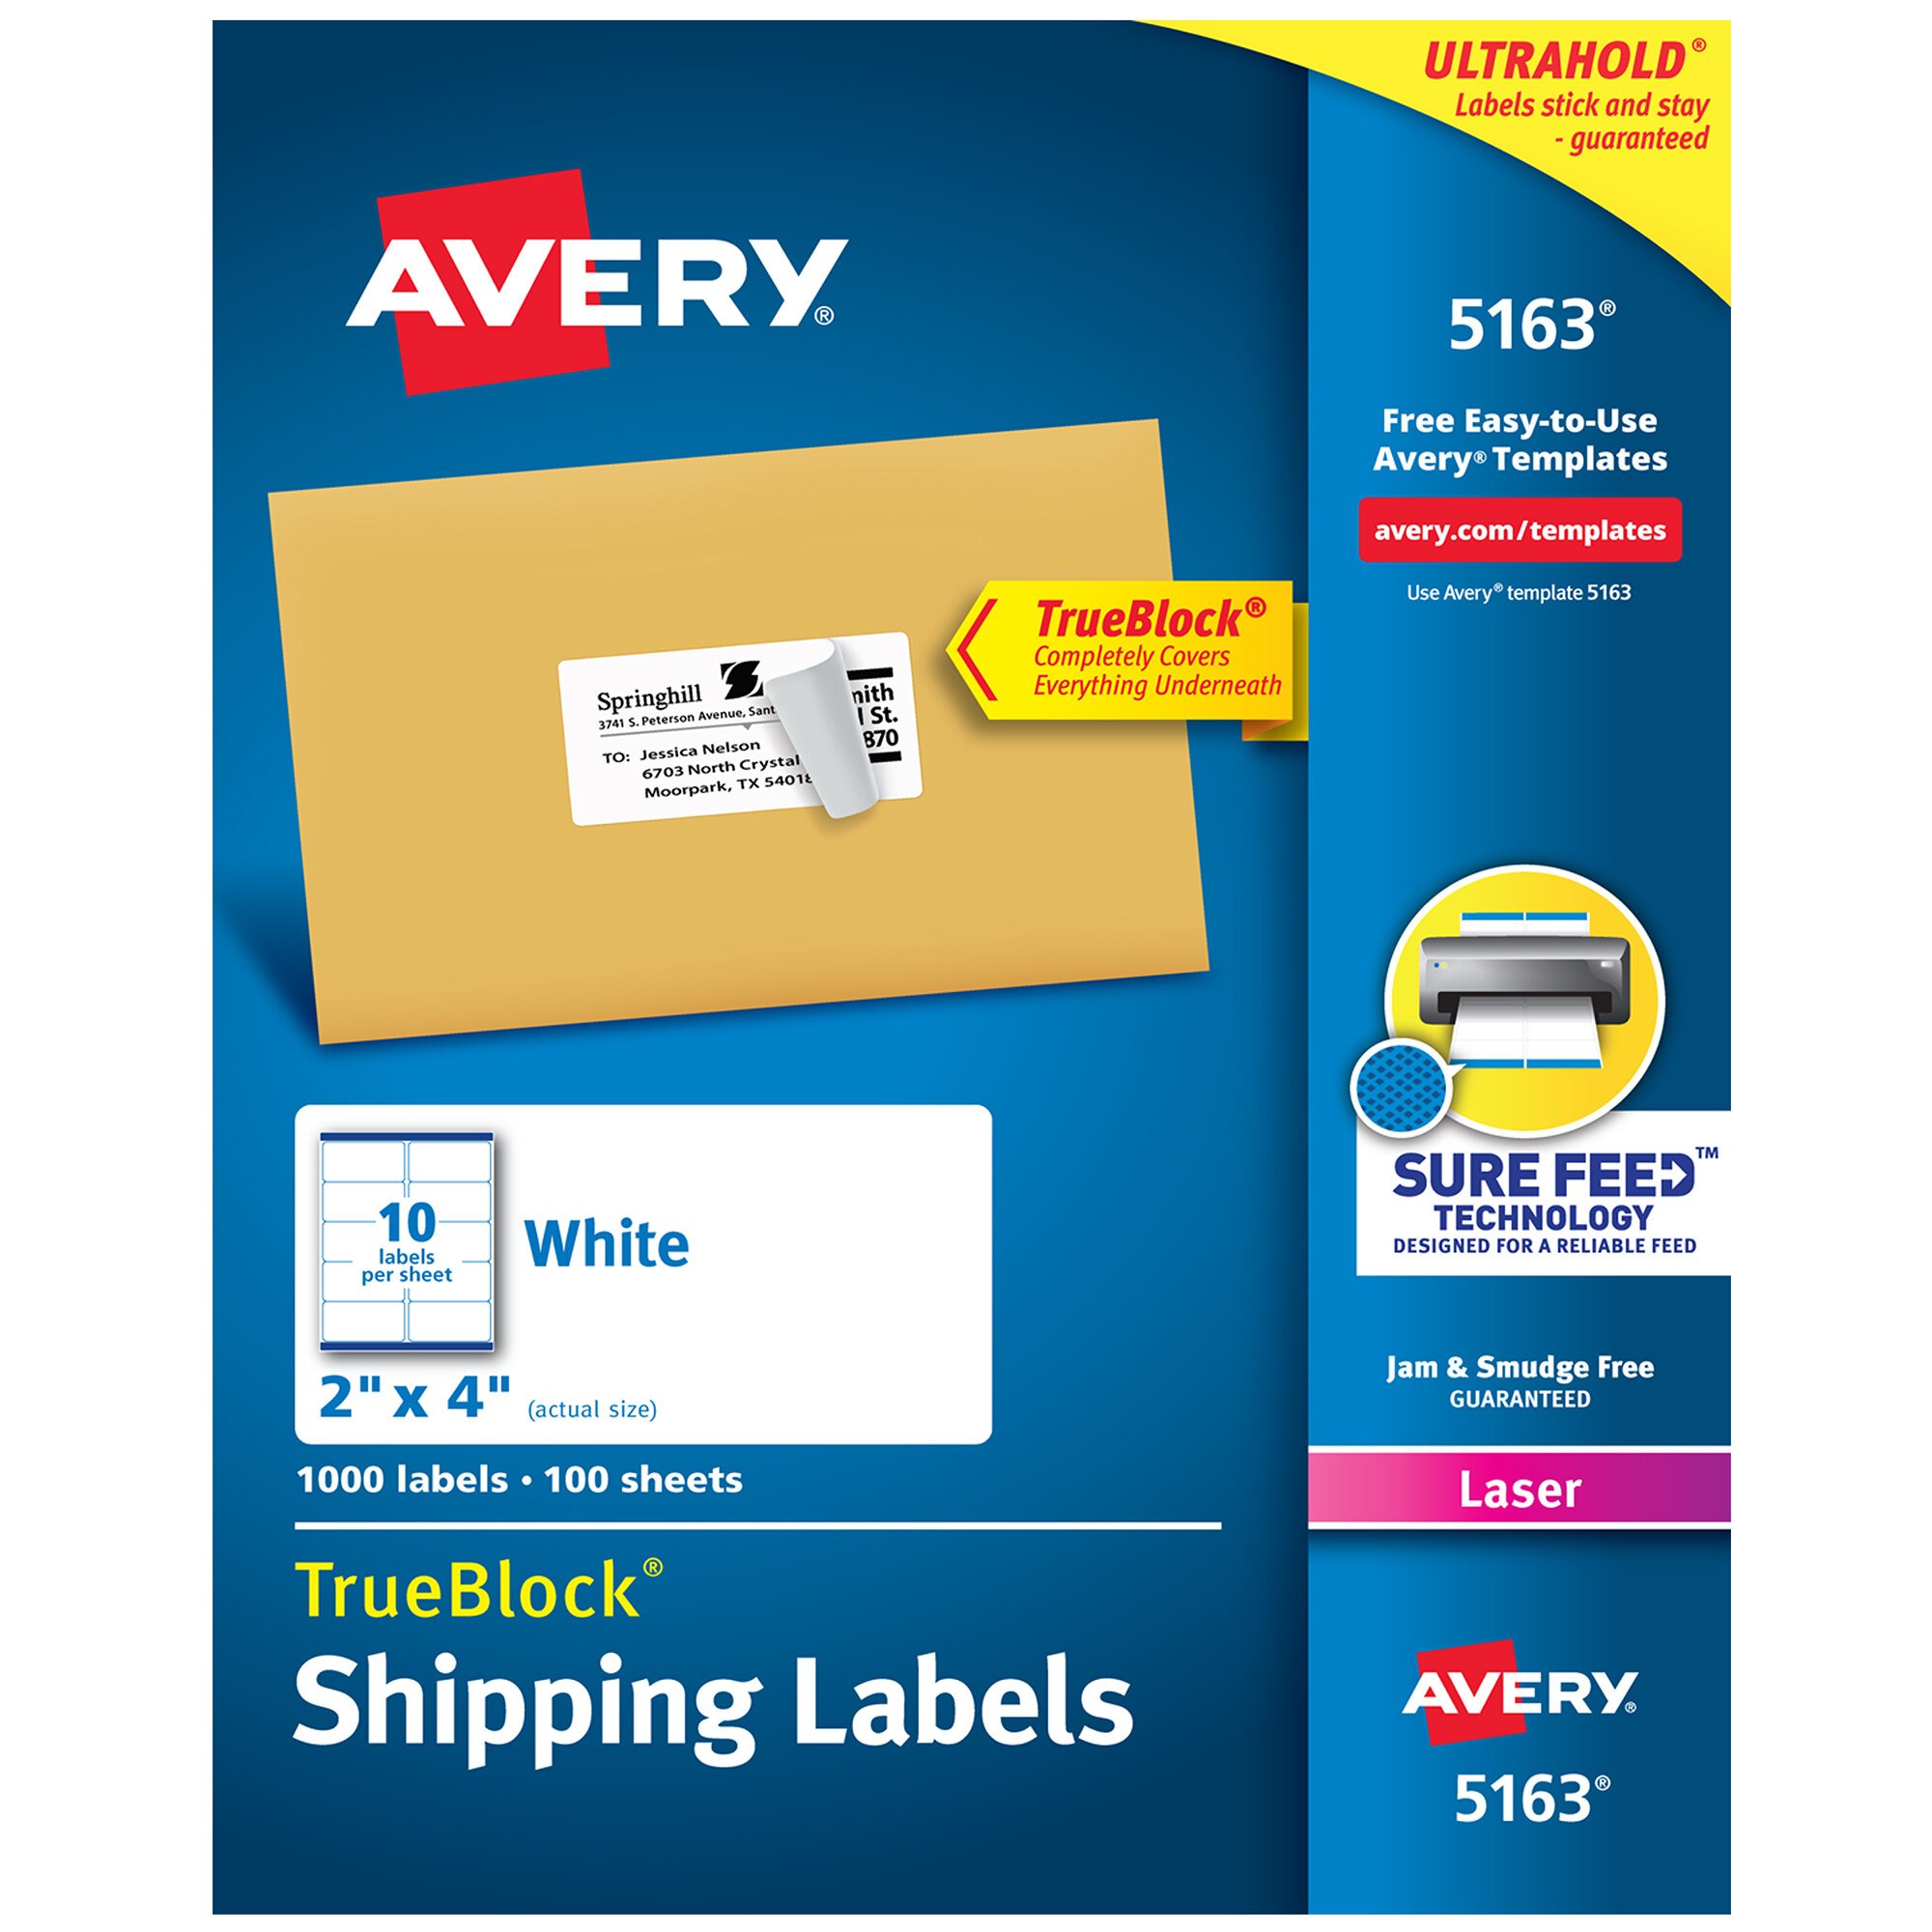 avery-8163-template-for-google-docs